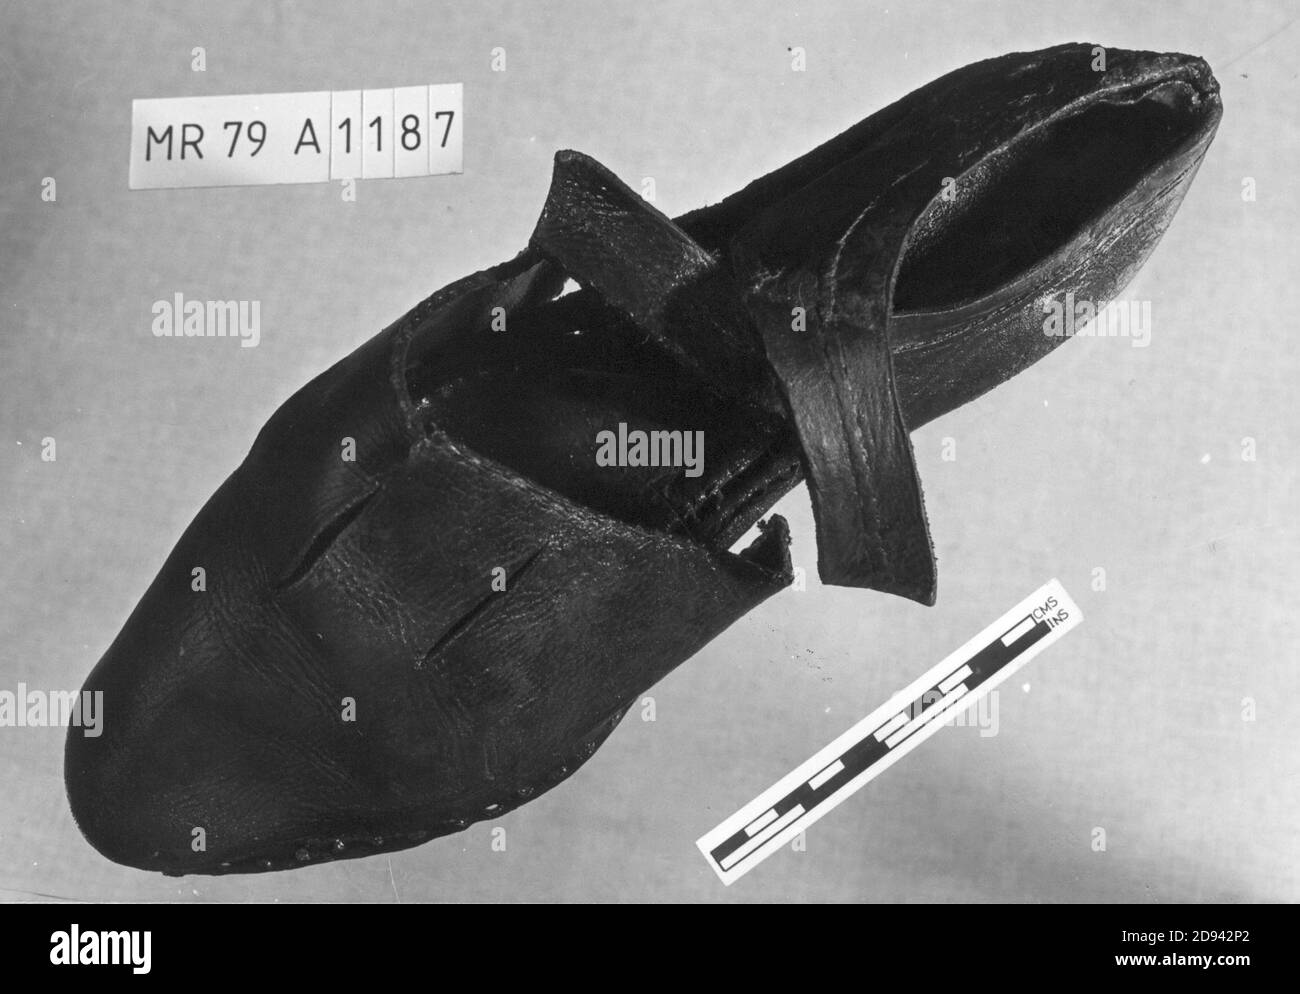 A TUDOR SHOE ARTEFACTS FROM THE MARY ROSE. PORTSMOUTH 1981 Stock Photo ...